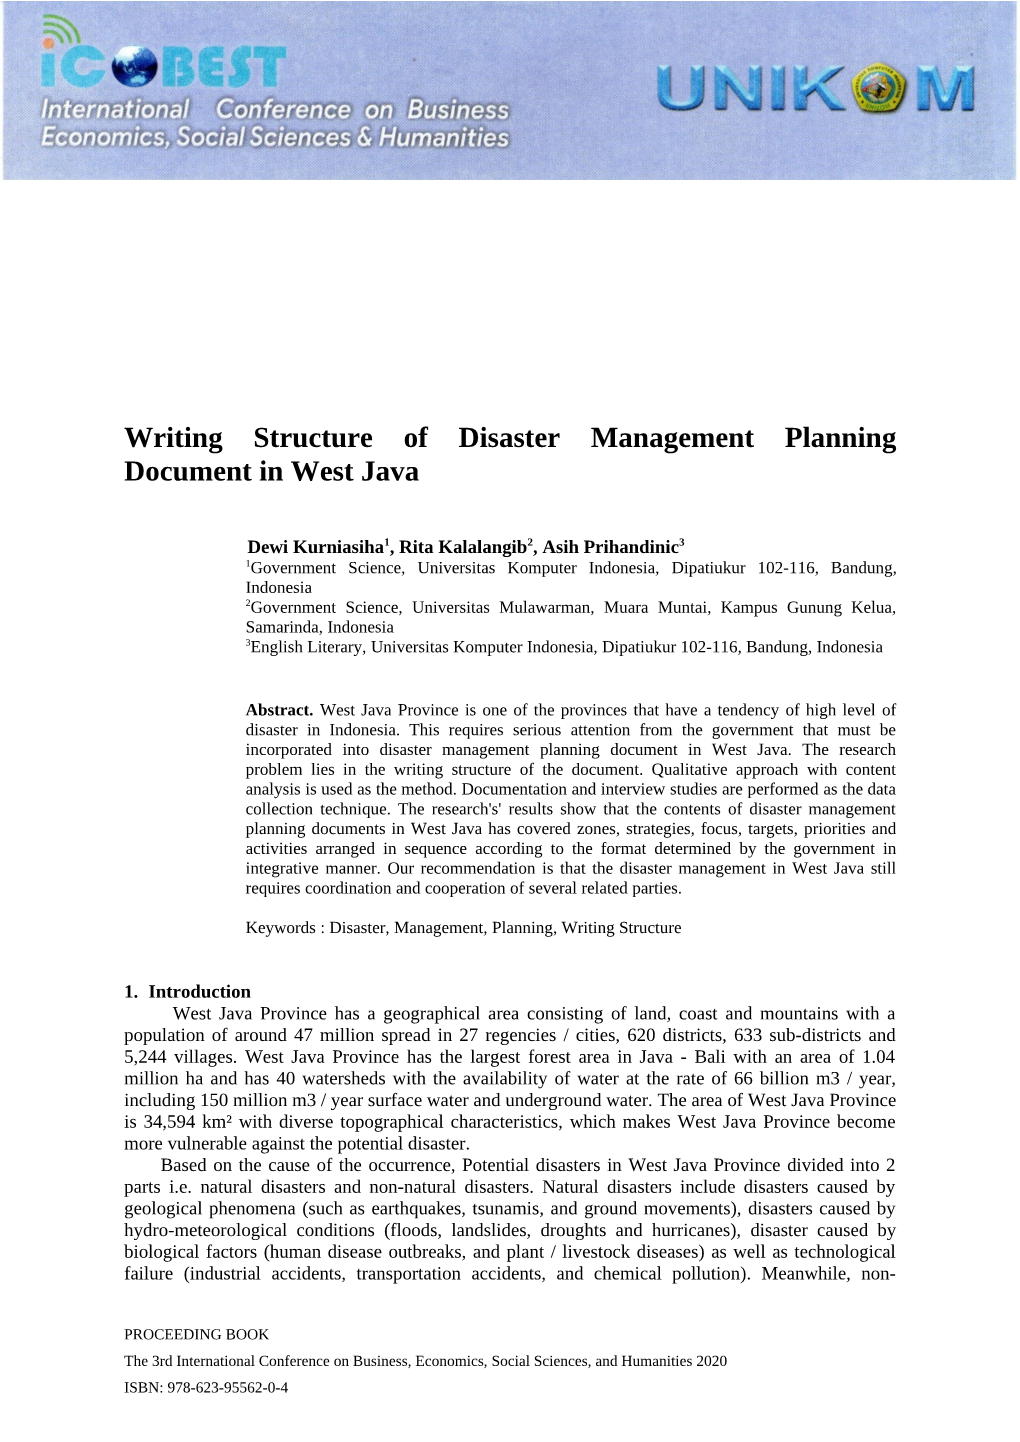 Writing Structure of Disaster Management Planning Document in West Java